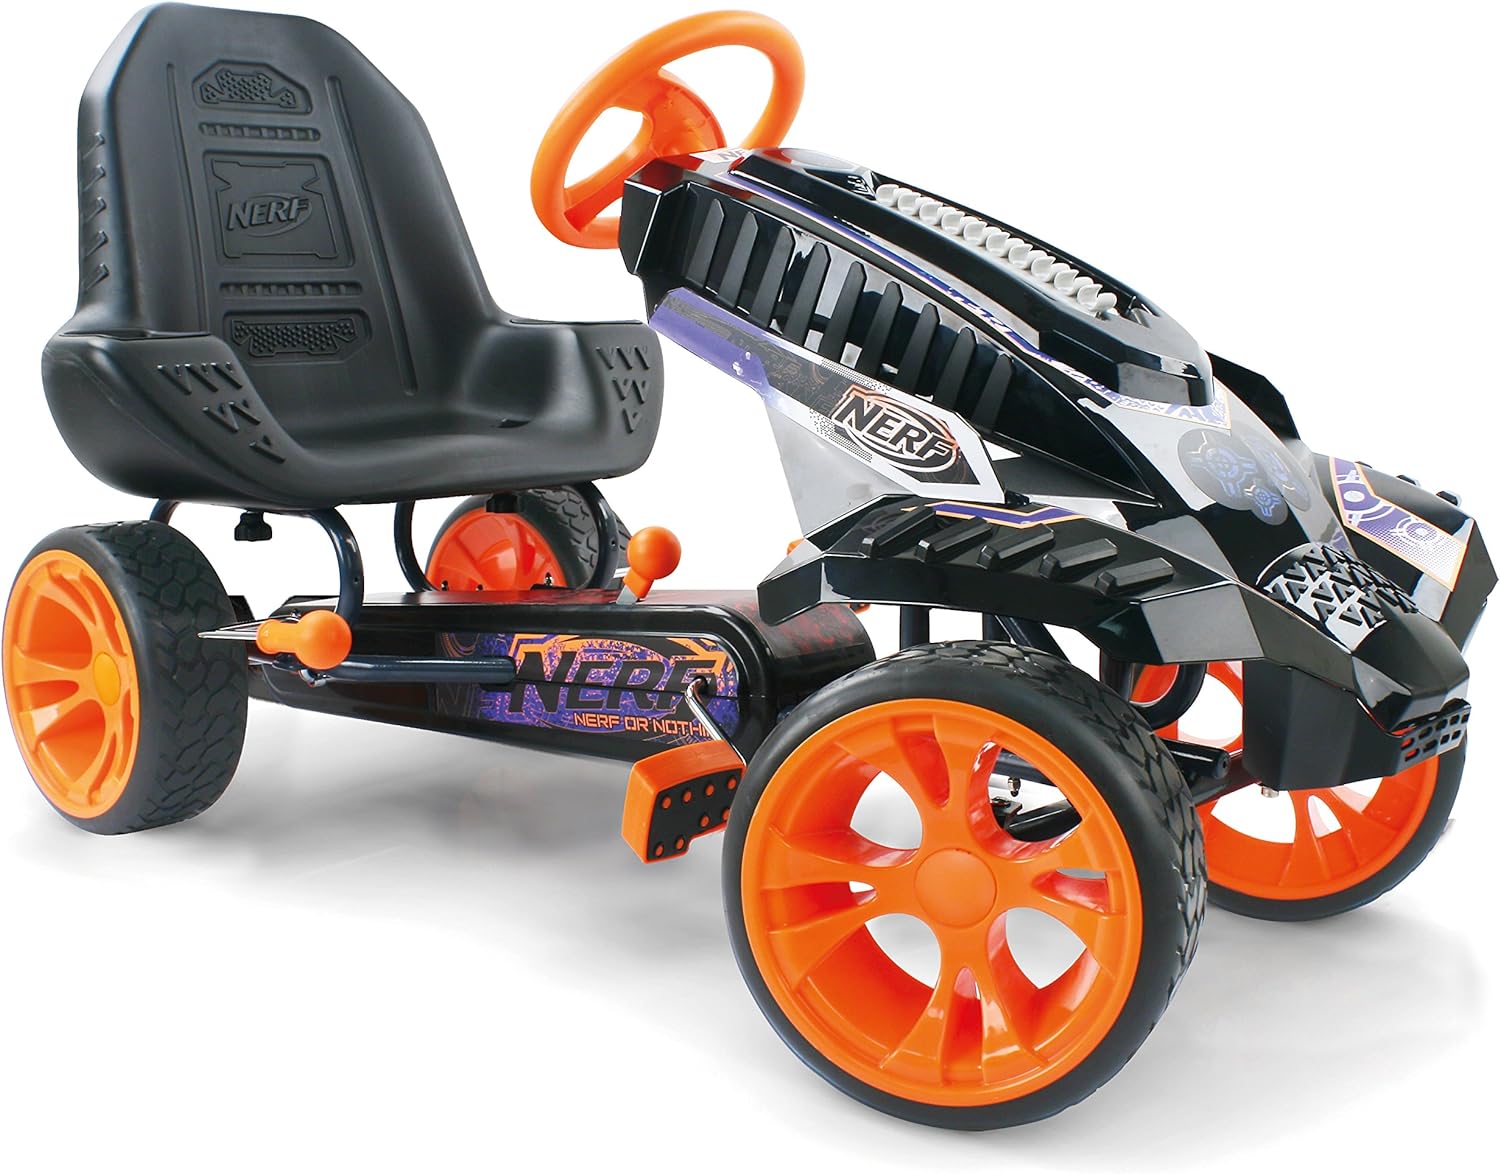 Hauck: Nerf Battle Racer, Pedal Go Kart, Includes a Placeholder for Nerf Blasters, Holds Up to 120 Pounds, Blasters and Darts Not Included, For Ages 4 and up